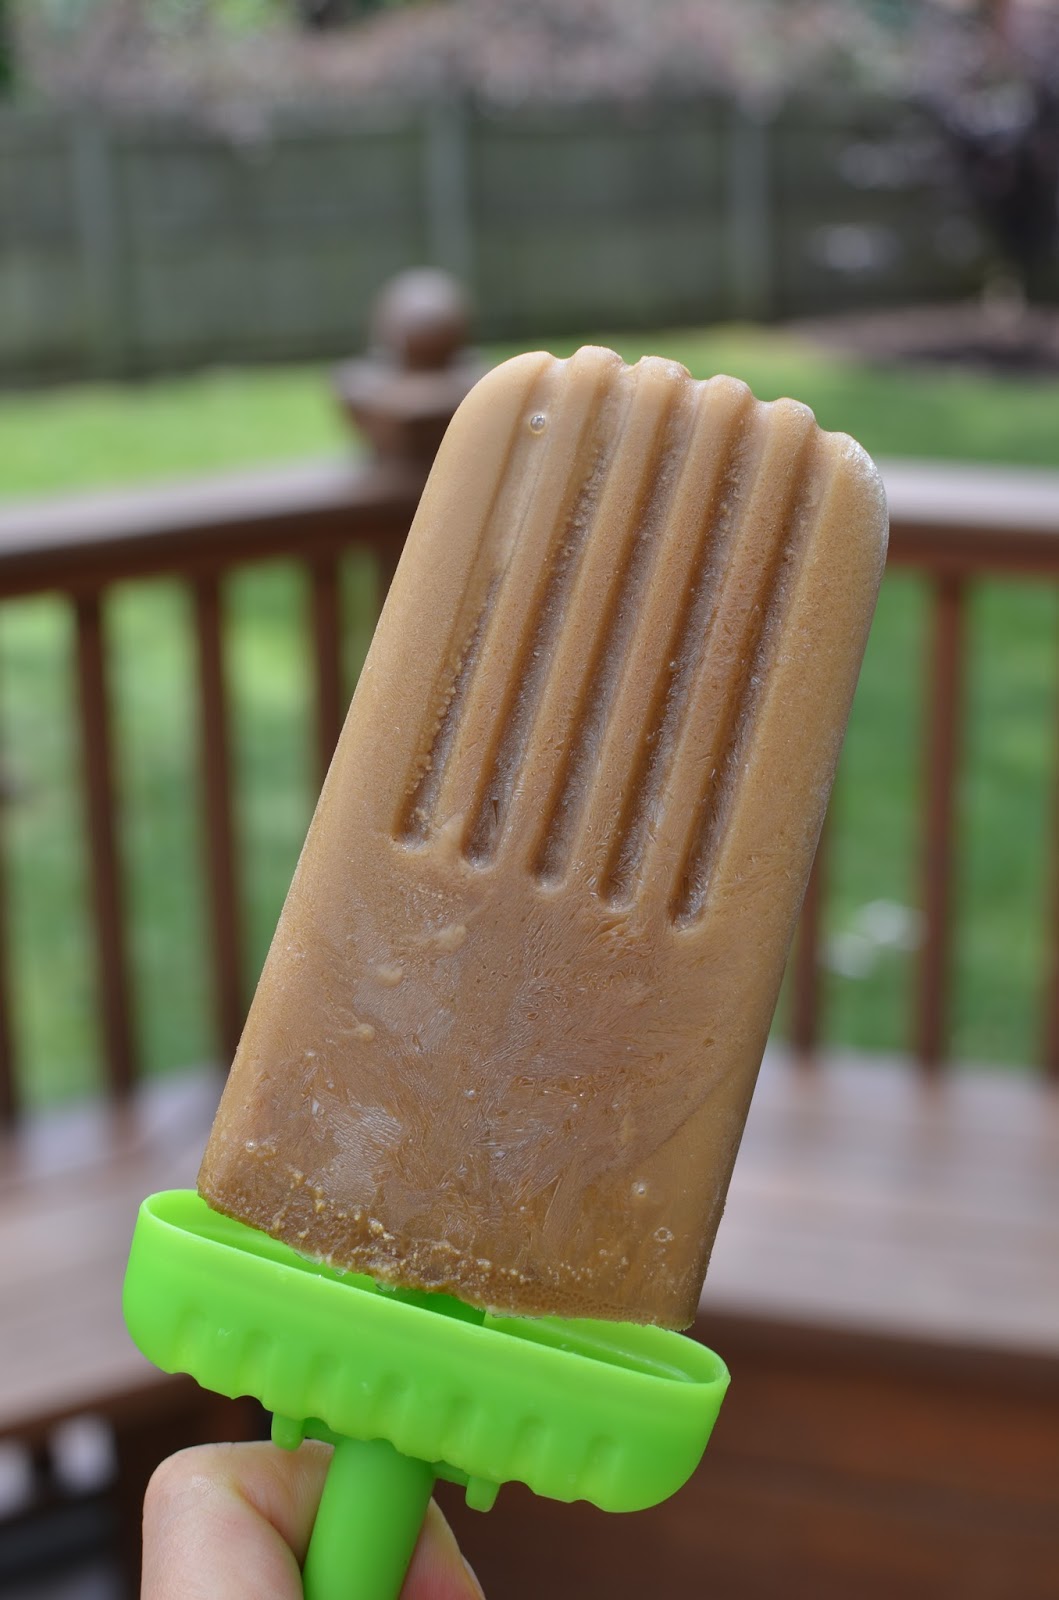 How to make popsicles: Ice pop experts weigh in on their favorite molds